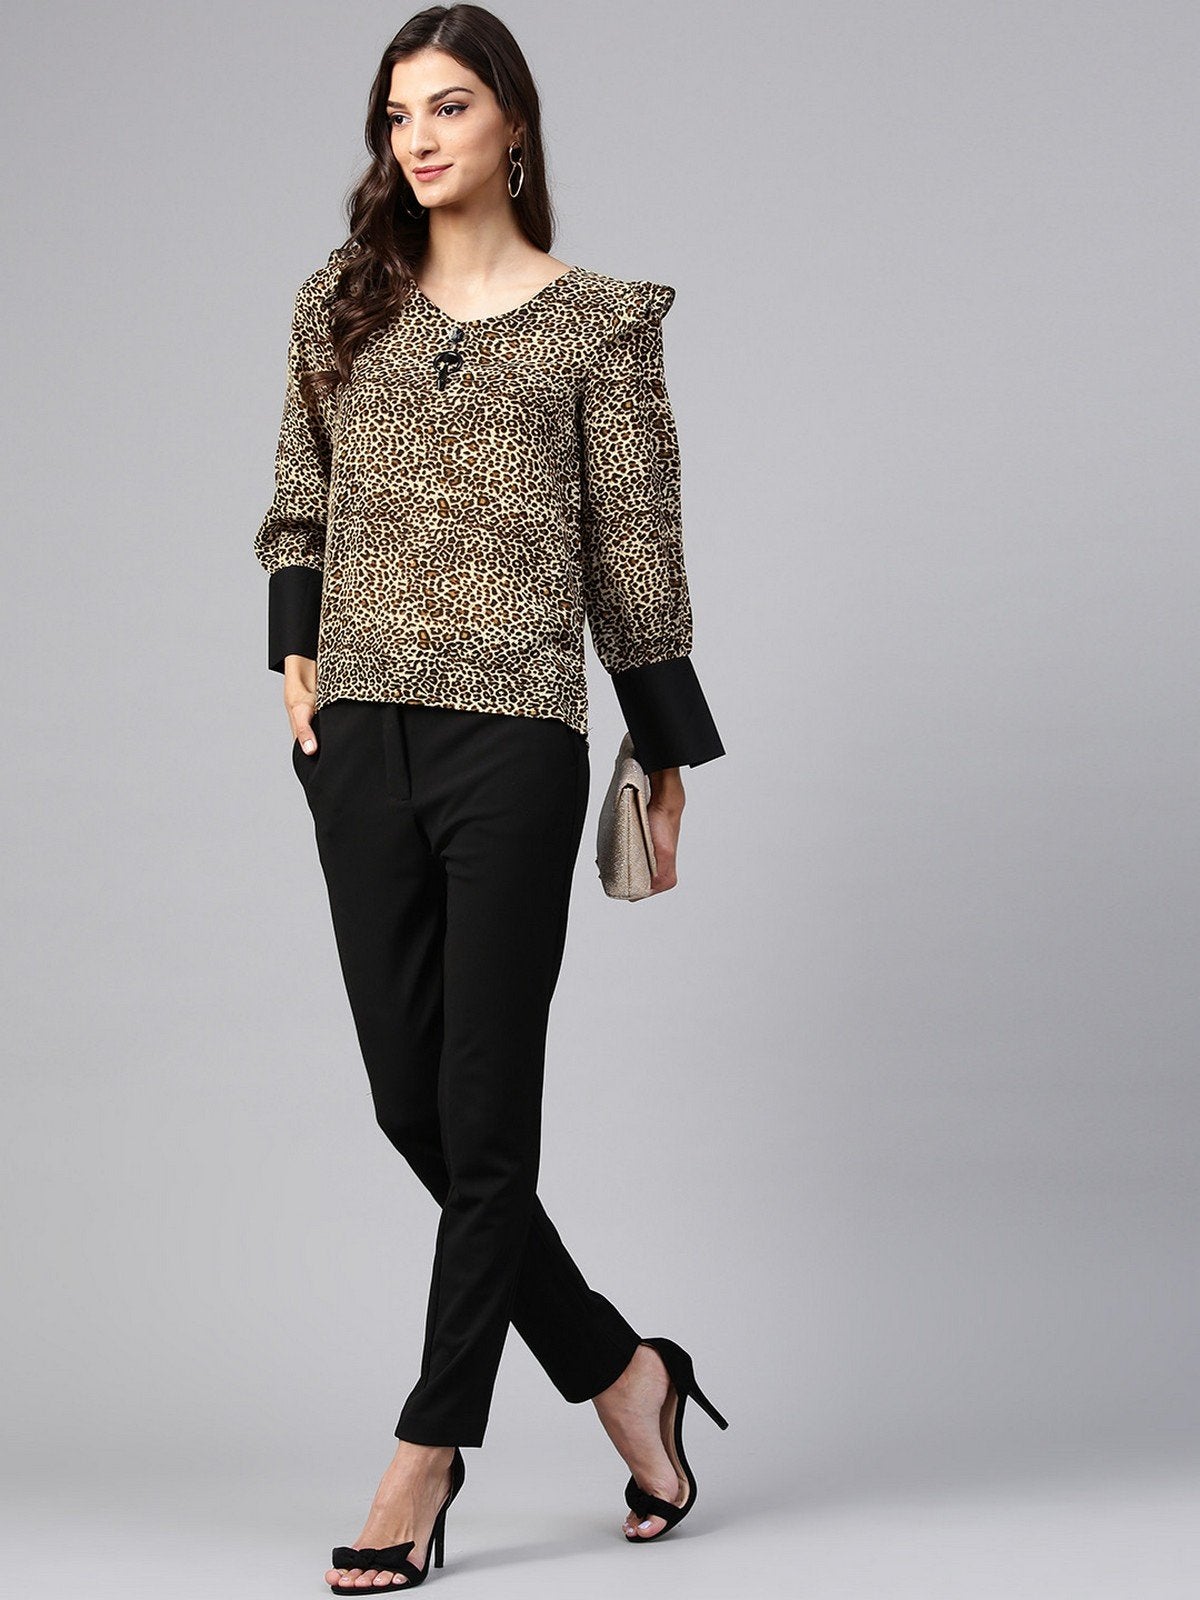 Women's Brown Animal Print Top With Neck Brotch - Pannkh